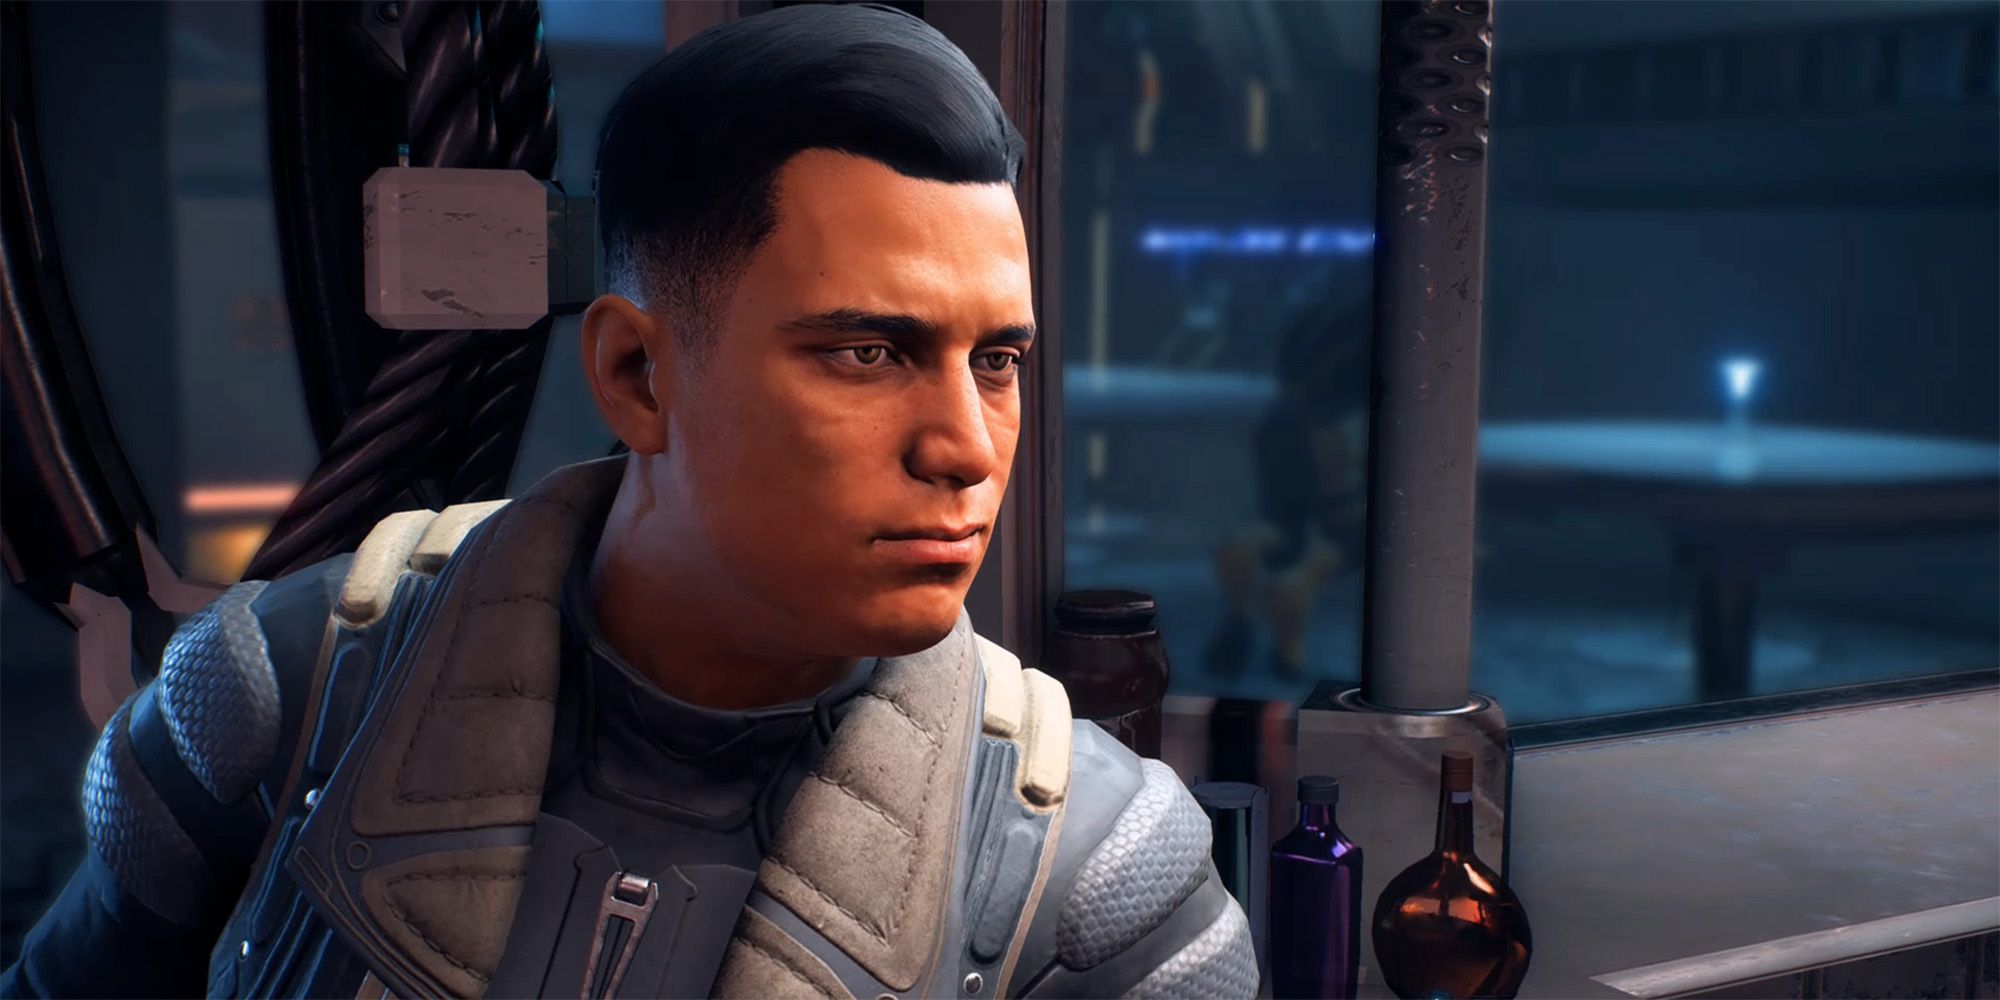 Mass Effect: Andromeda - The Charlatan's Intriguing Double Identity